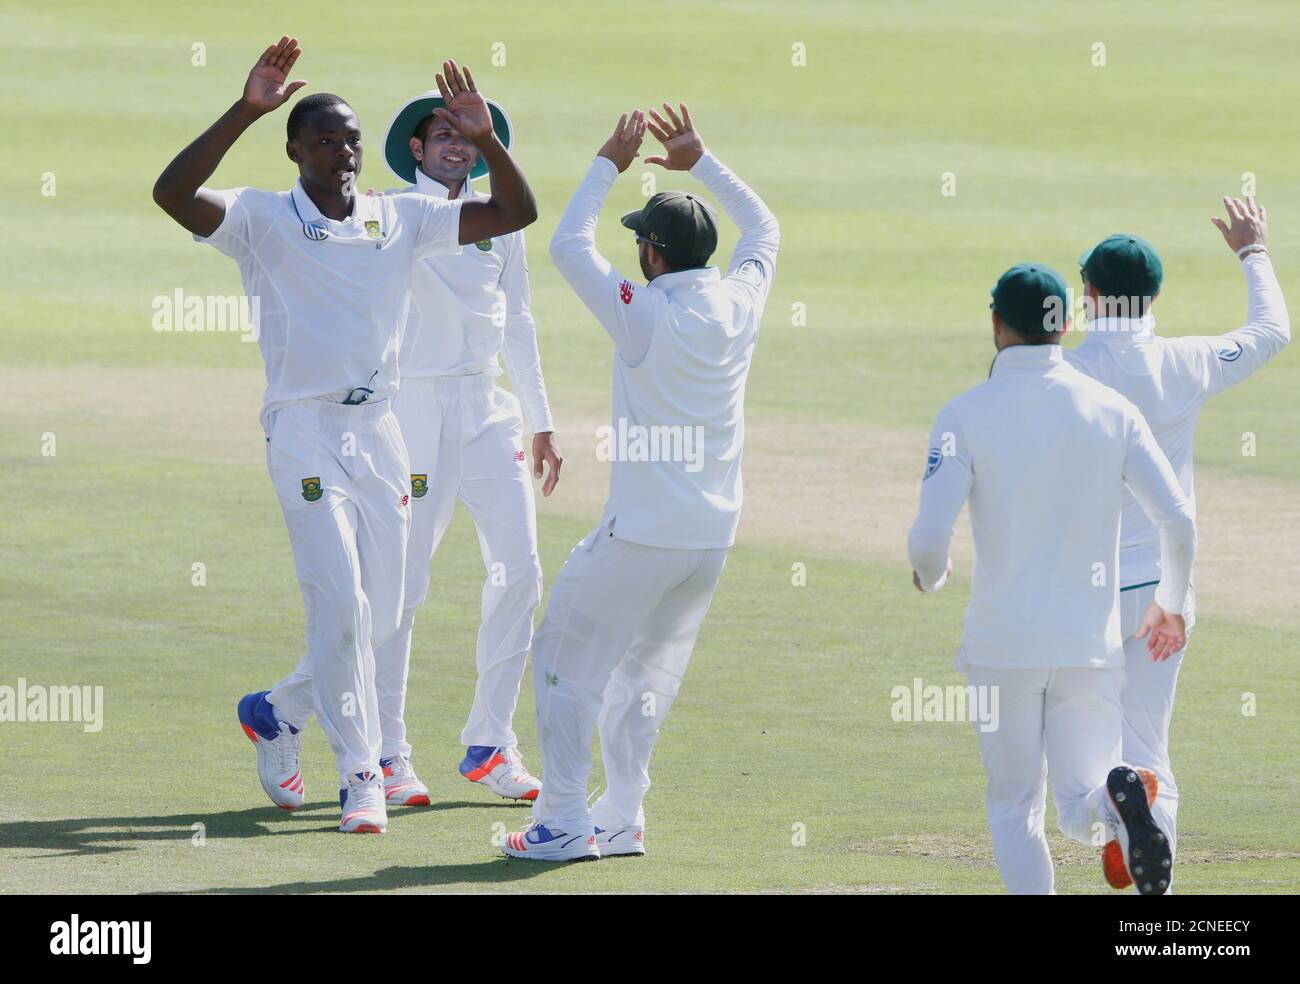 Cricket - Sri Lanka v South Africa - Second Test cricket match - Newlands Stadium, Cape Town, South Africa - 03/01/2017 - South Africa's Kagiso Rabada celebrates taking the wicket of Sri Lanka's Dinesh Chandimal. REUTERS/Mike Hutchings Stock Photo